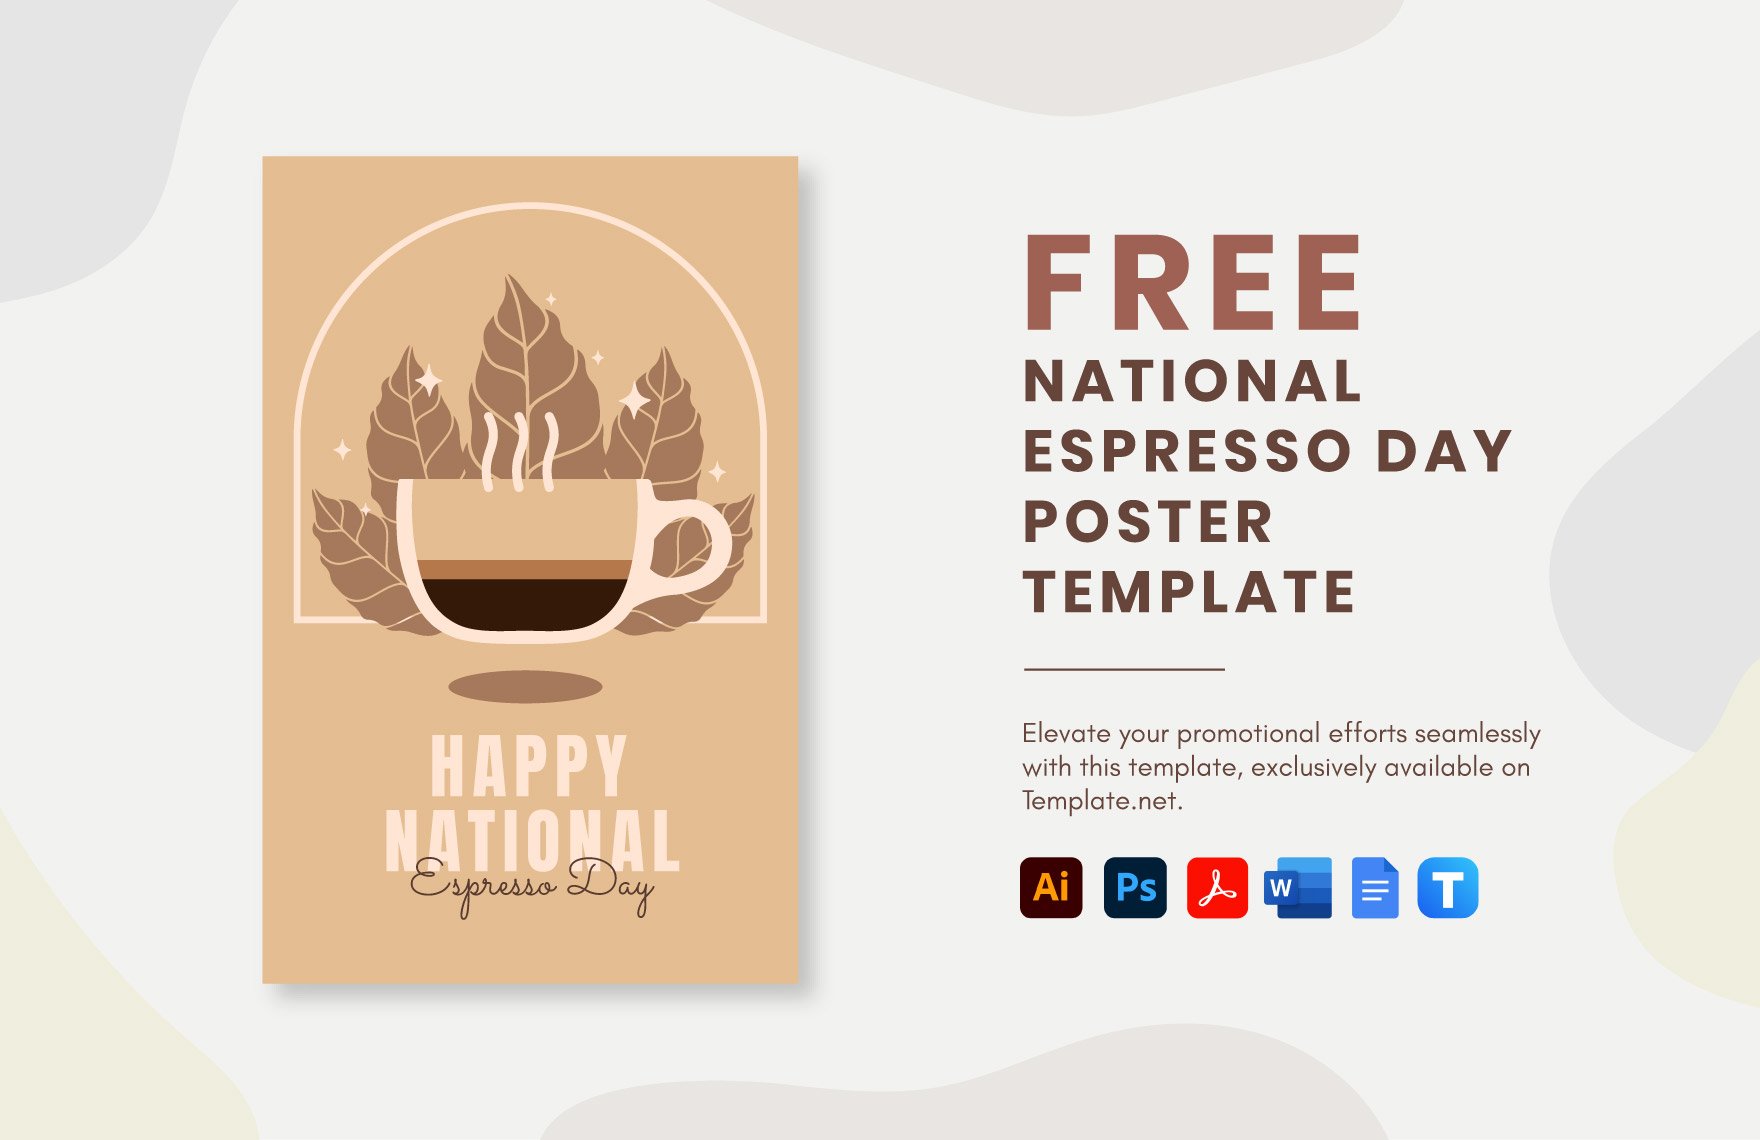 National Espresso Day Poster Template in Word, Google Docs, PDF, Illustrator, PSD